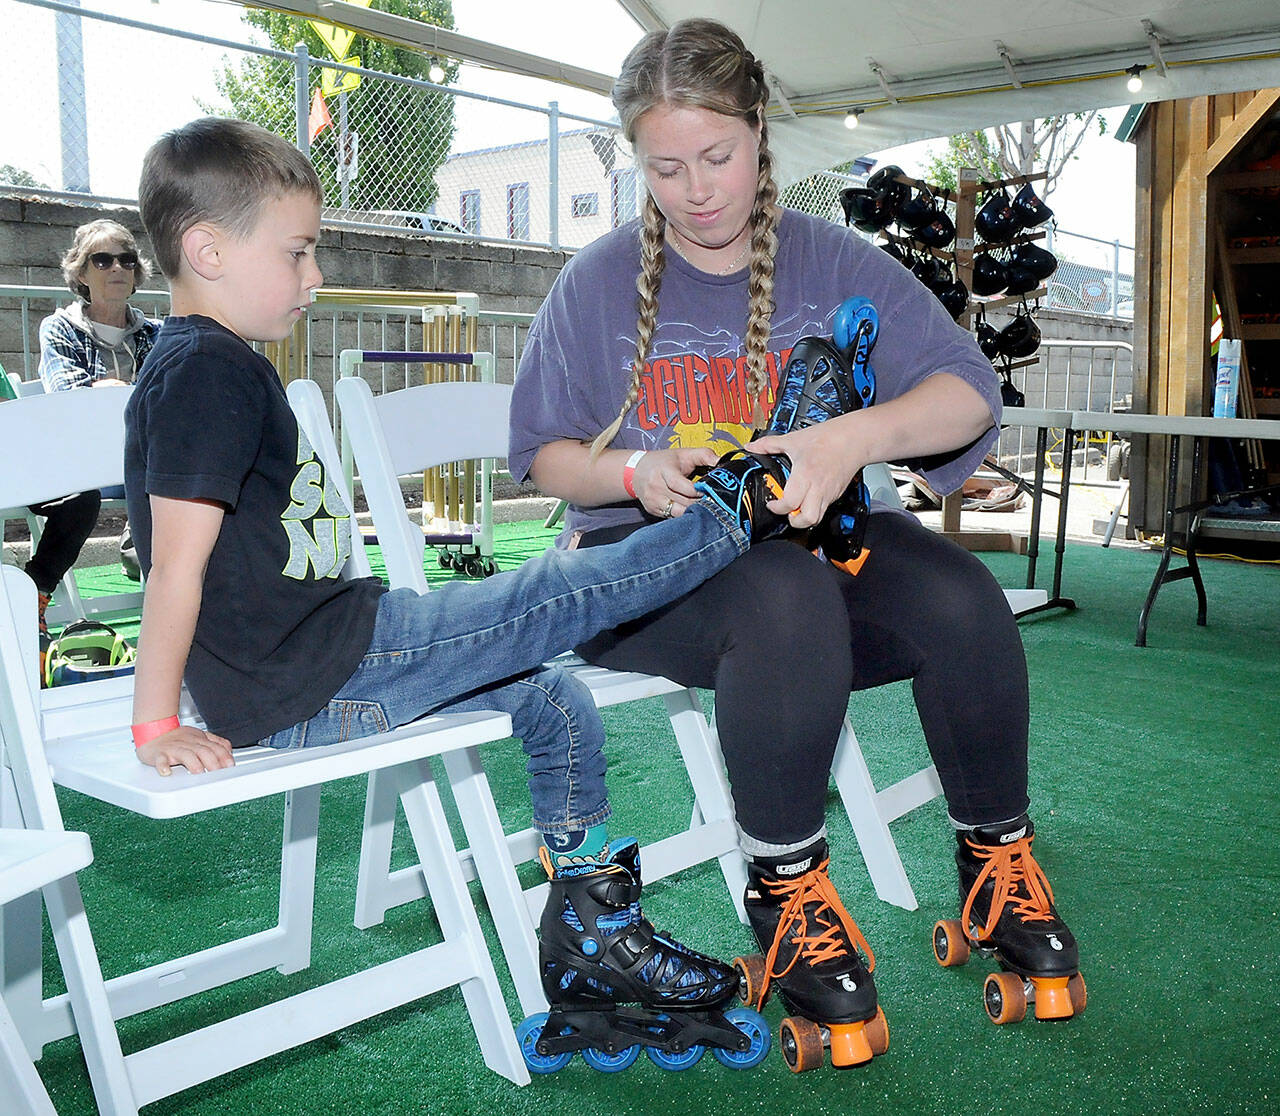 Devyn Roblan of Port Angeles makes adjustments to a rollerblade worn by her son, Miles Roblan, 7, on Friday’s opening day of skating at the seasonal Olympic Skate Villege in downtown Port Angeles. (KEITH THORPE/PENINSULA DAILY NEWS)